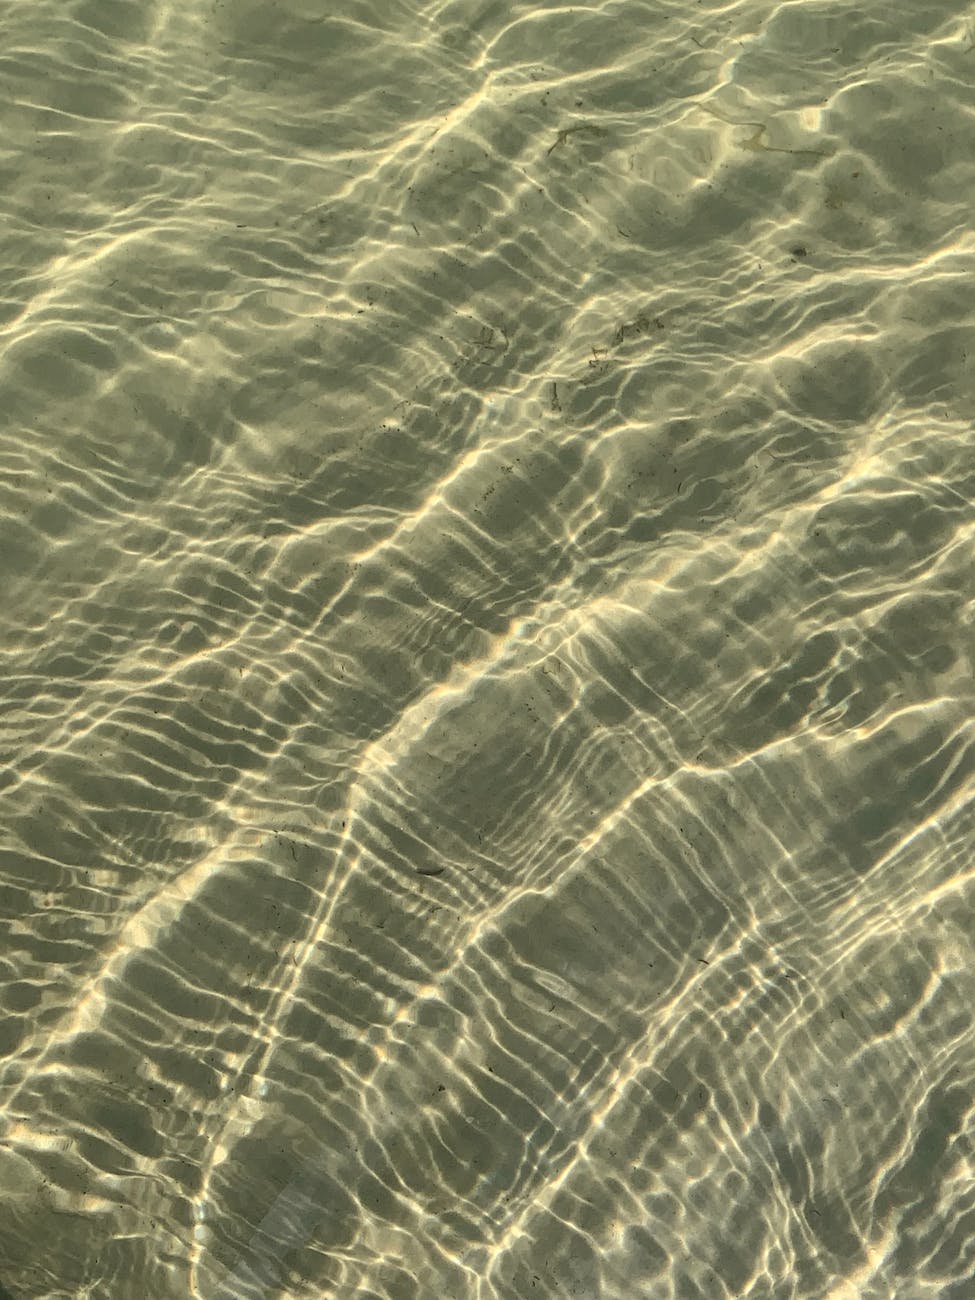 rippling water reflecting the sun